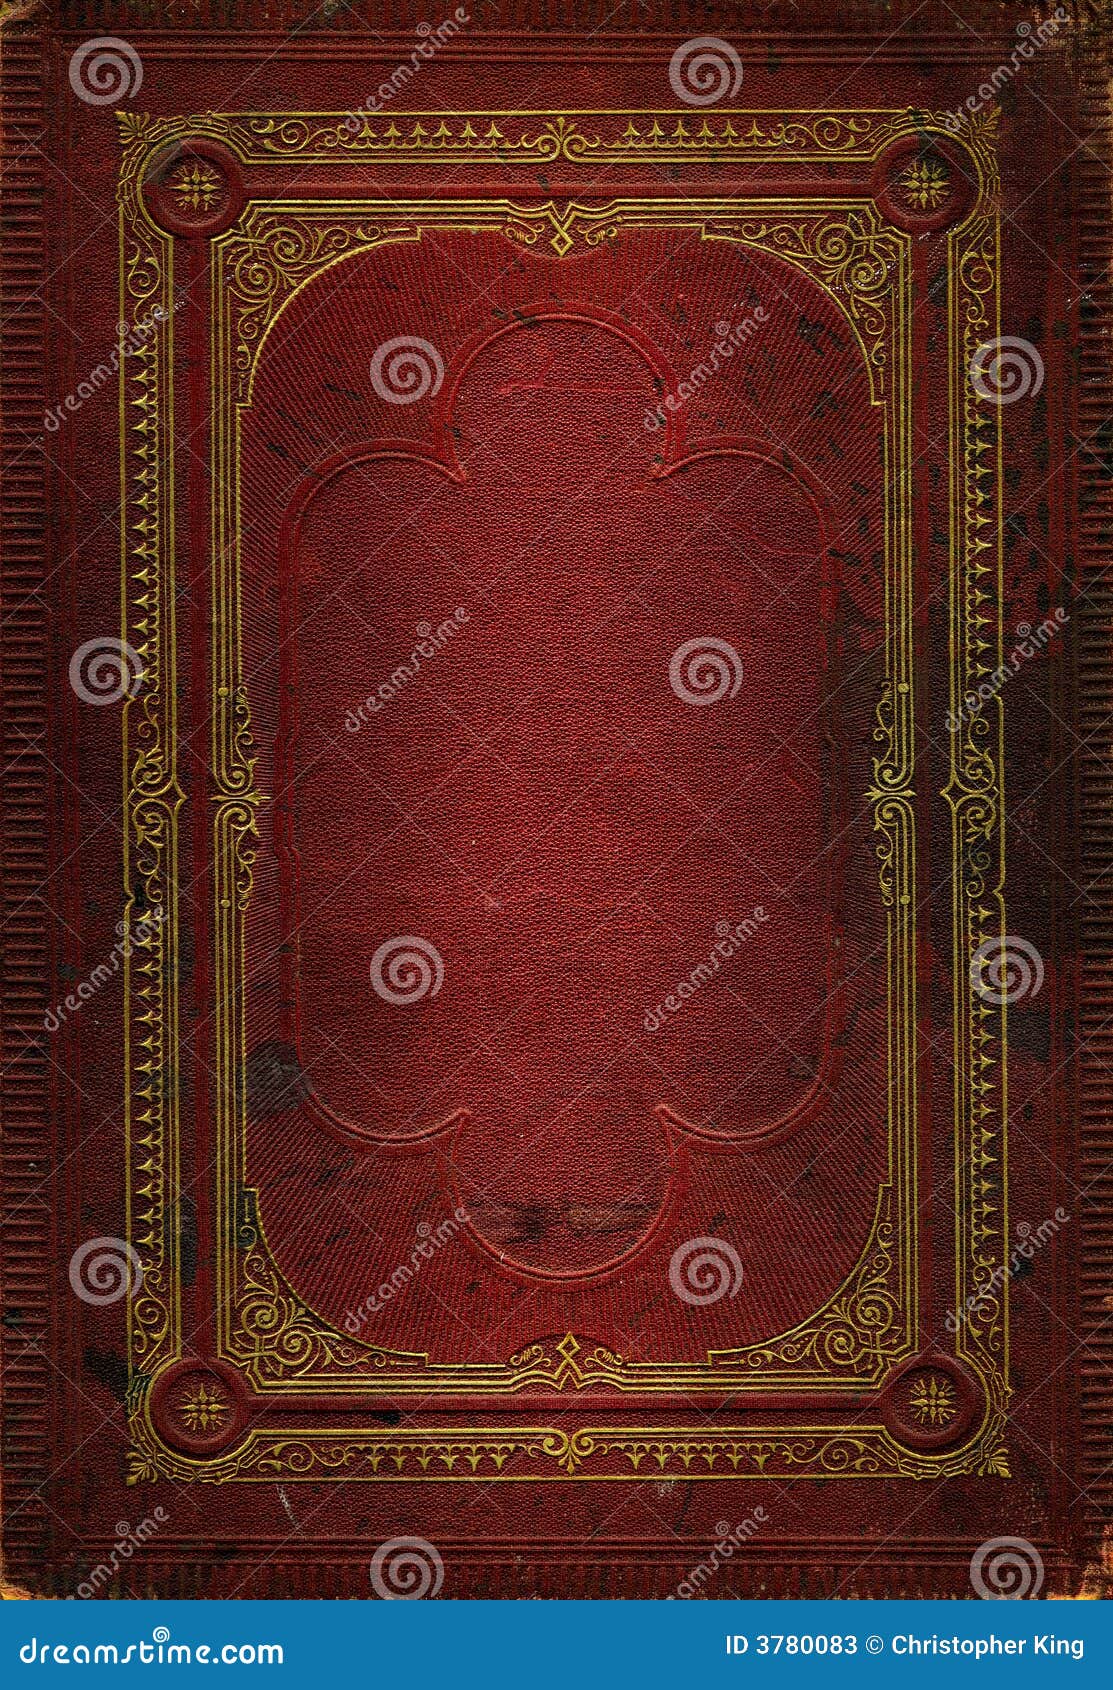 old red leather texture with gold decorative frame